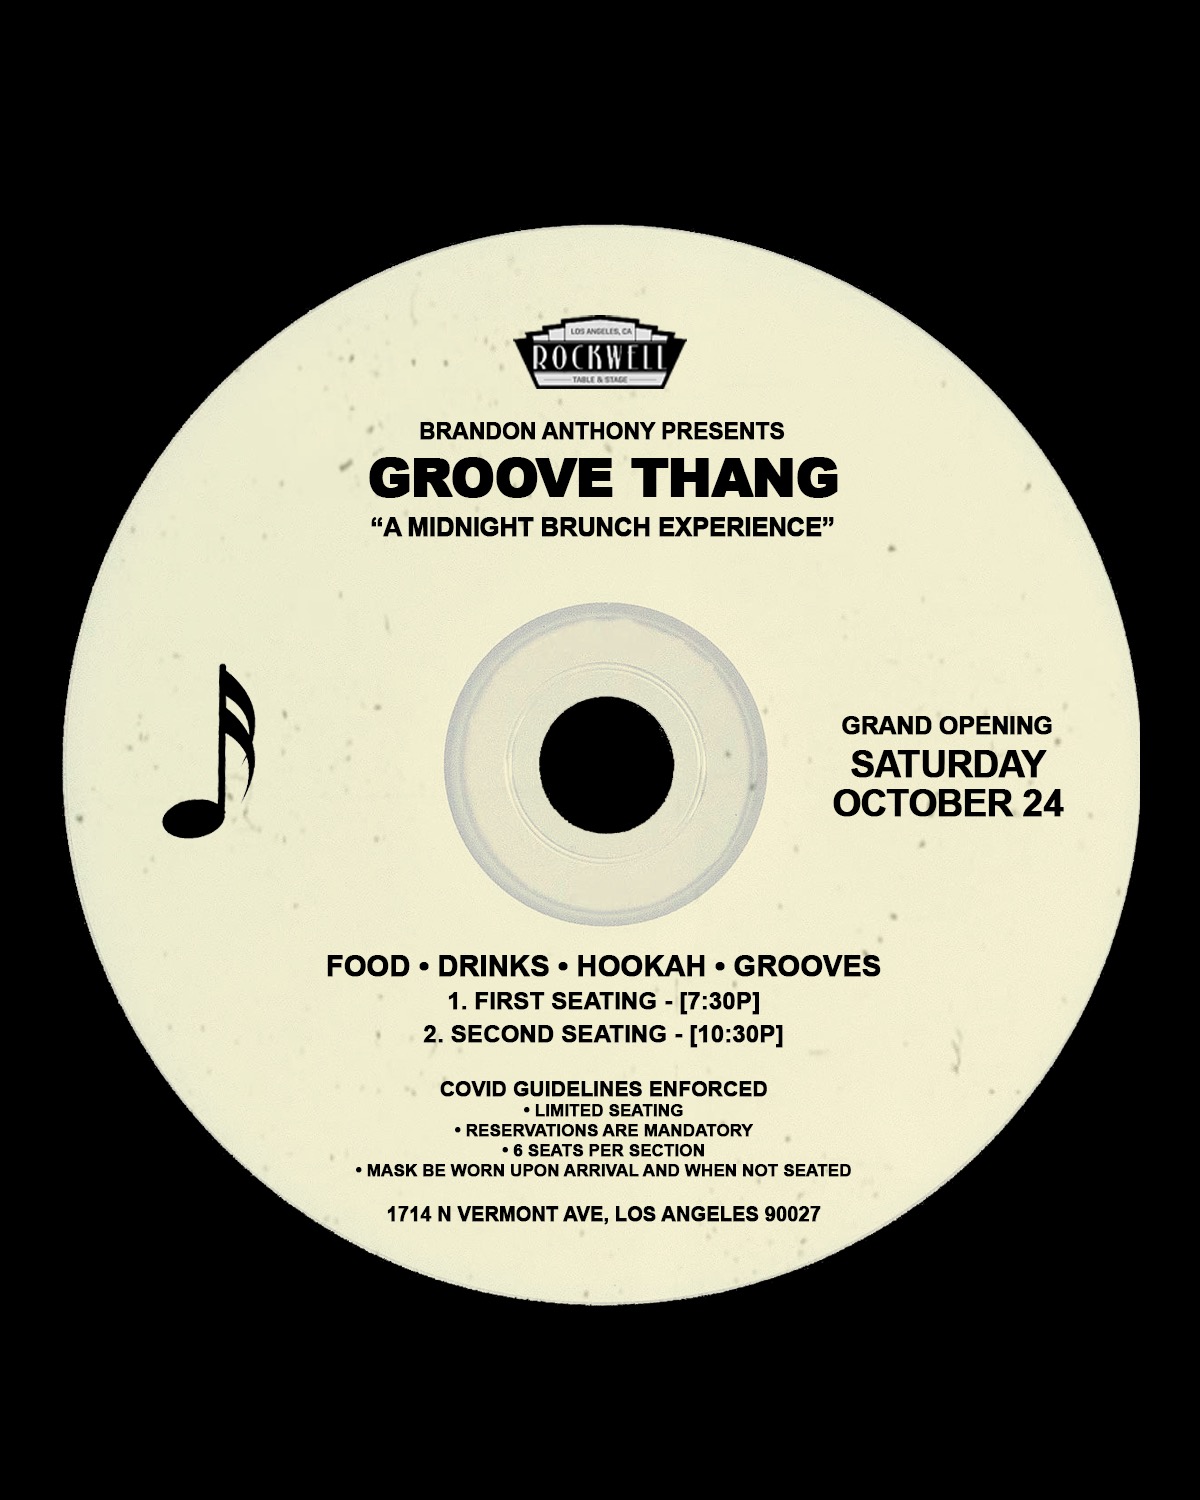 Buy Tickets to GROOVE THANG in Los Angeles on Oct 24, 2020